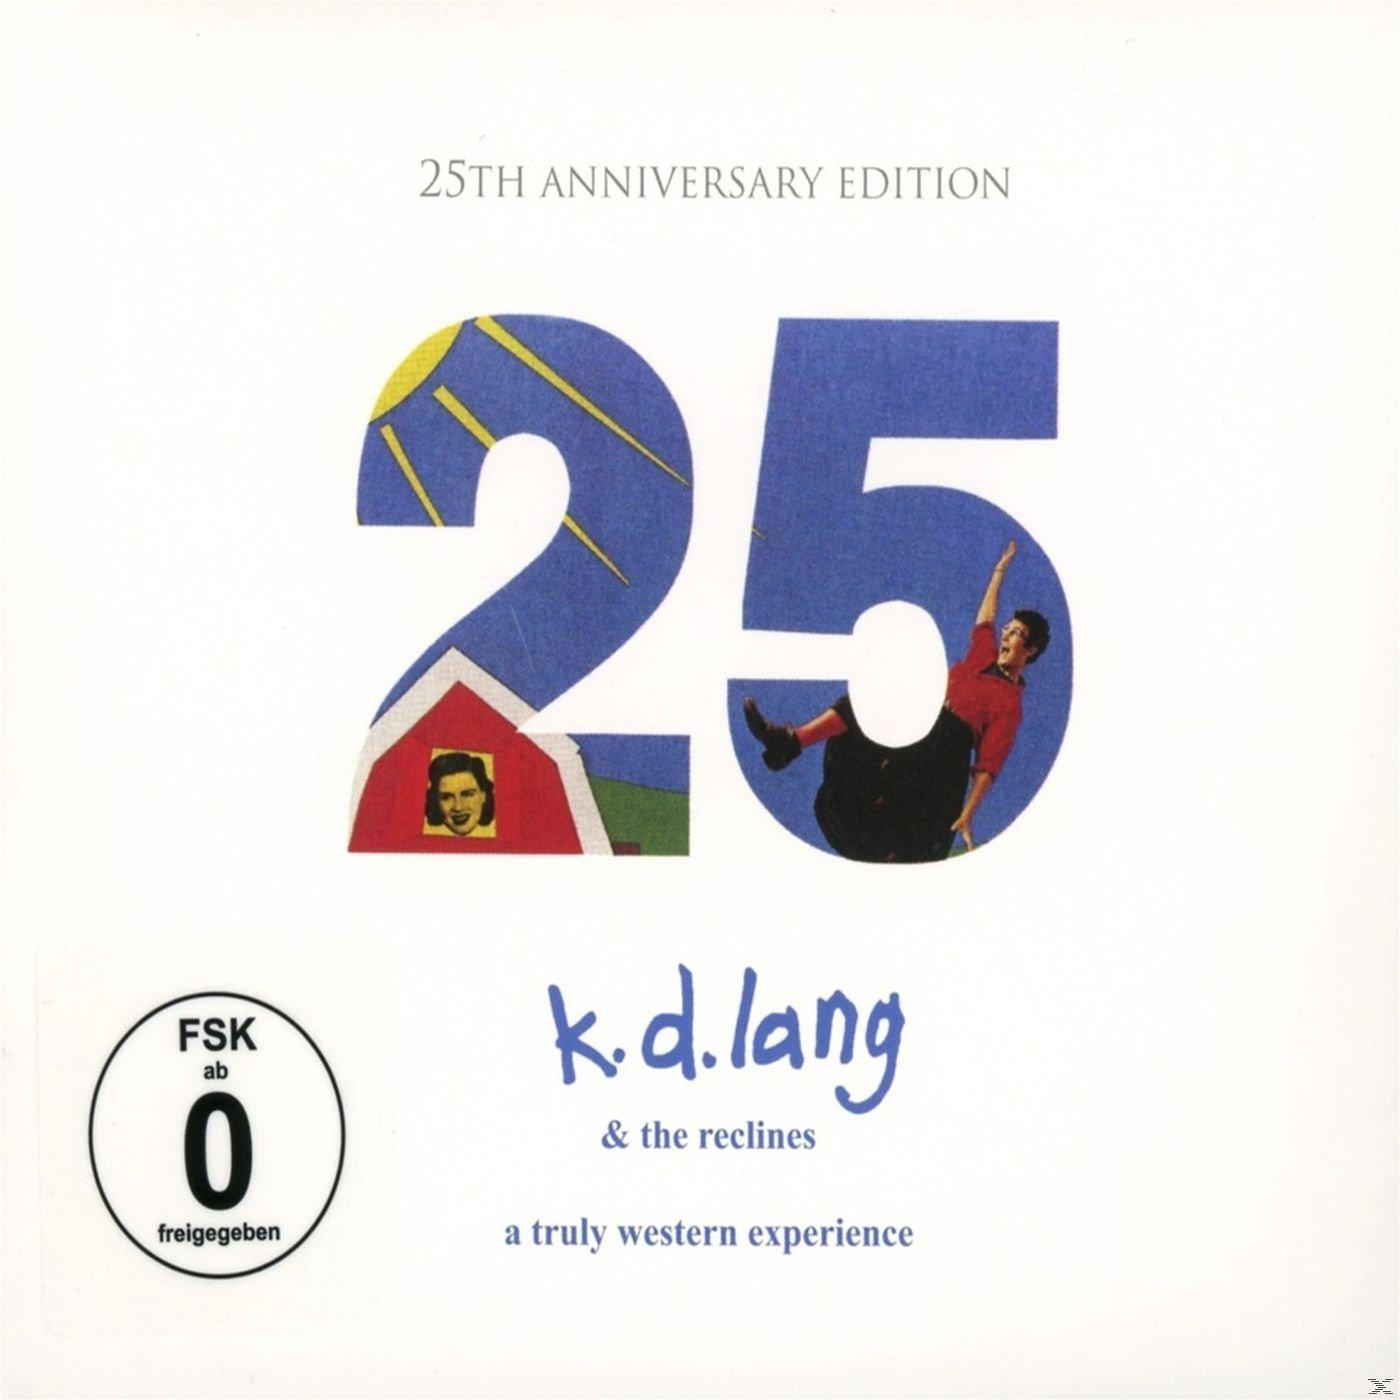 K.D. & The DVD (CD Reclines Western + A Experience Truly Lang - - Video)